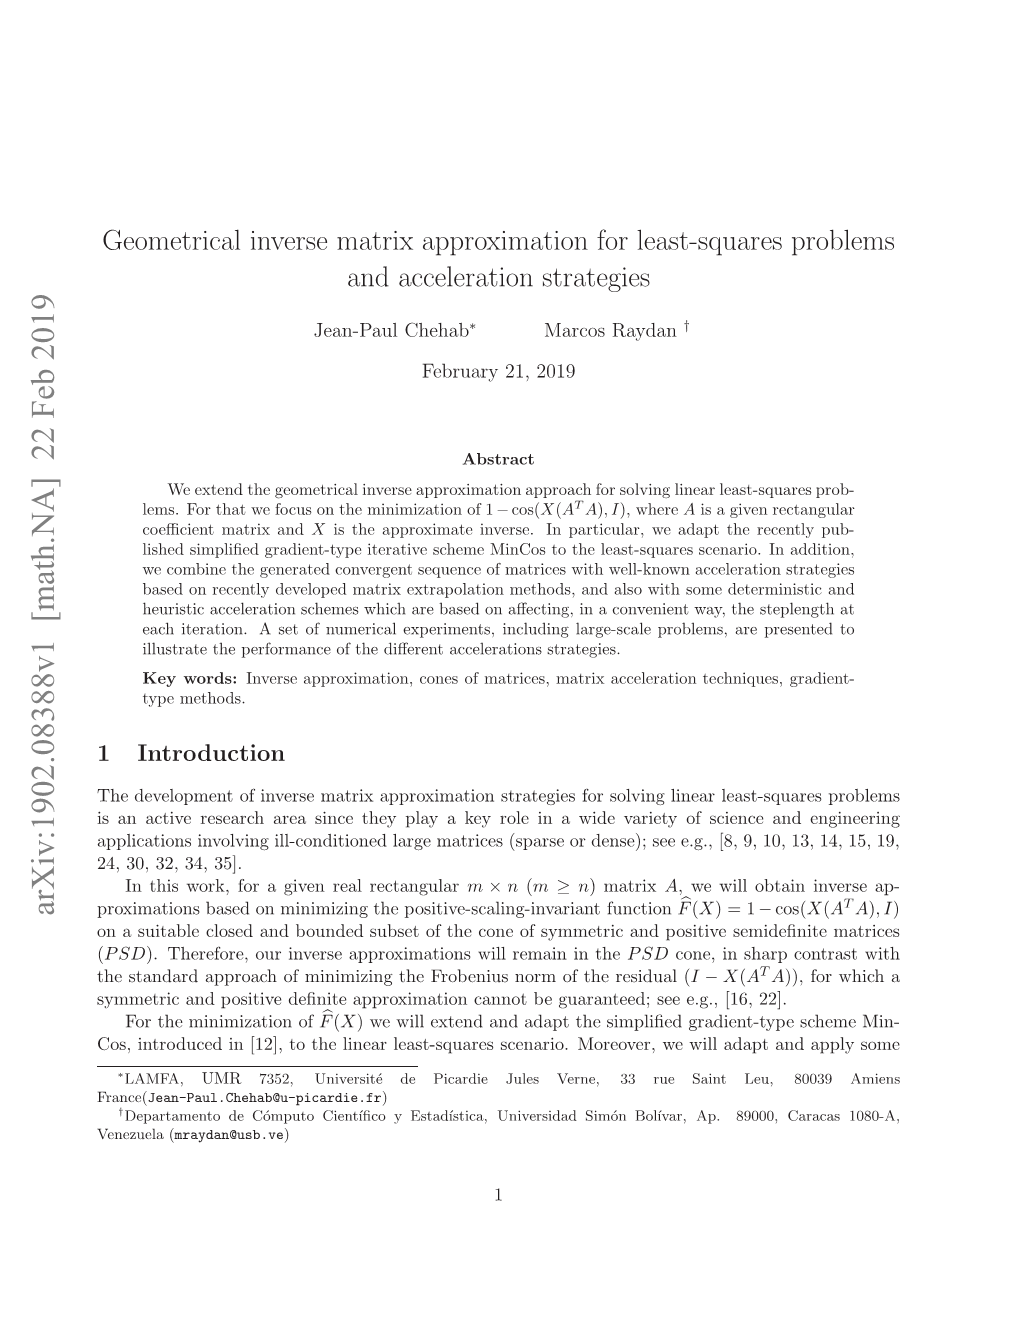 Geometrical Inverse Matrix Approximation for Least-Squares Problems and Acceleration Strategies